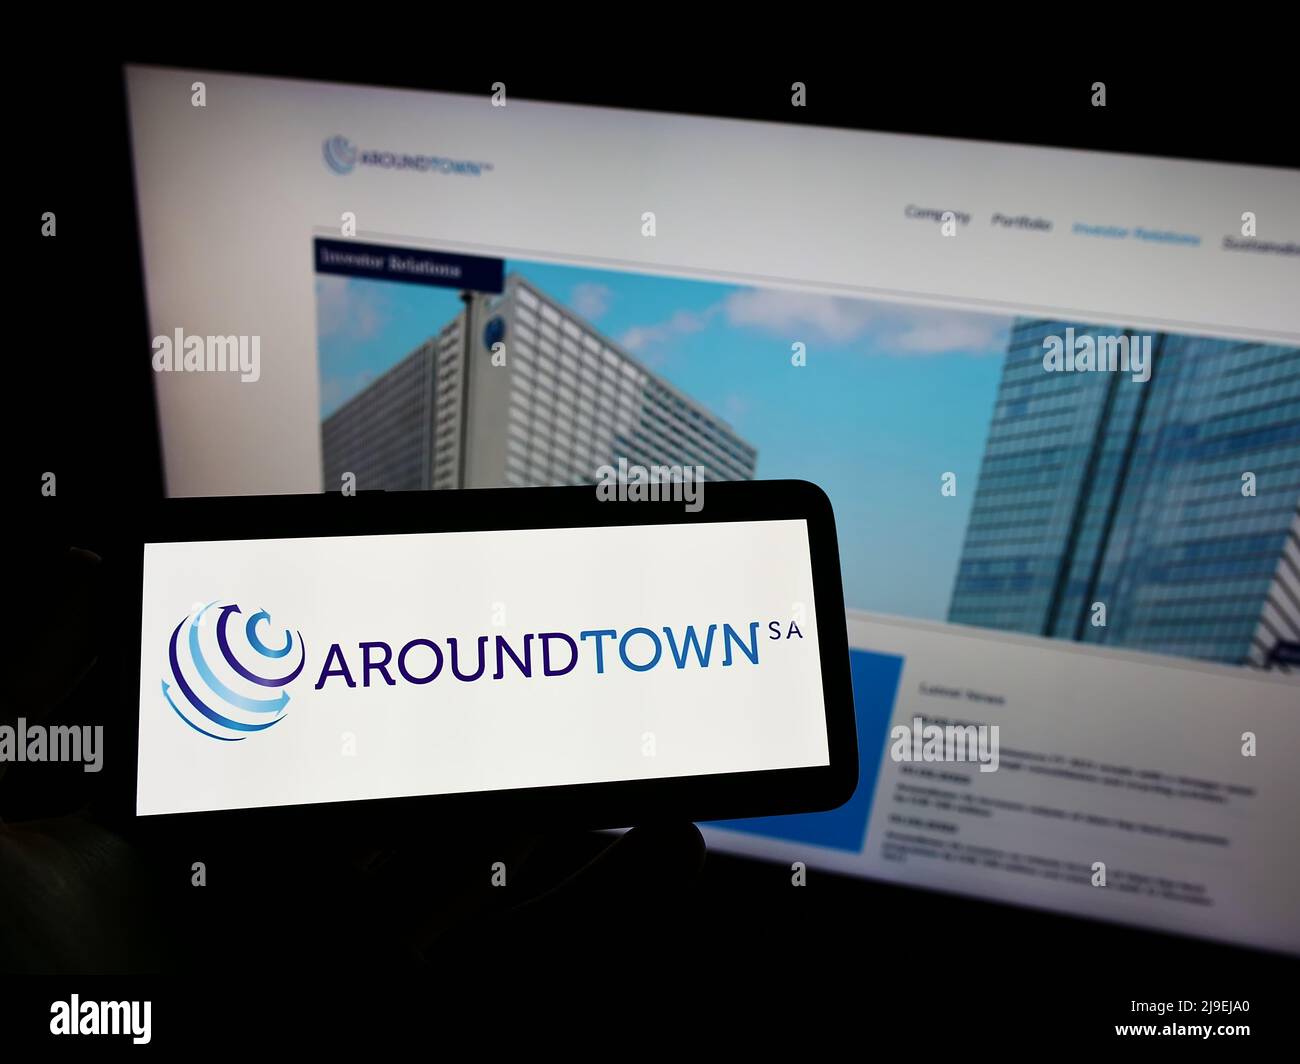 Person holding cellphone with logo of real estate company Aroundtown SA on screen in front of business webpage. Focus on phone display. Stock Photo